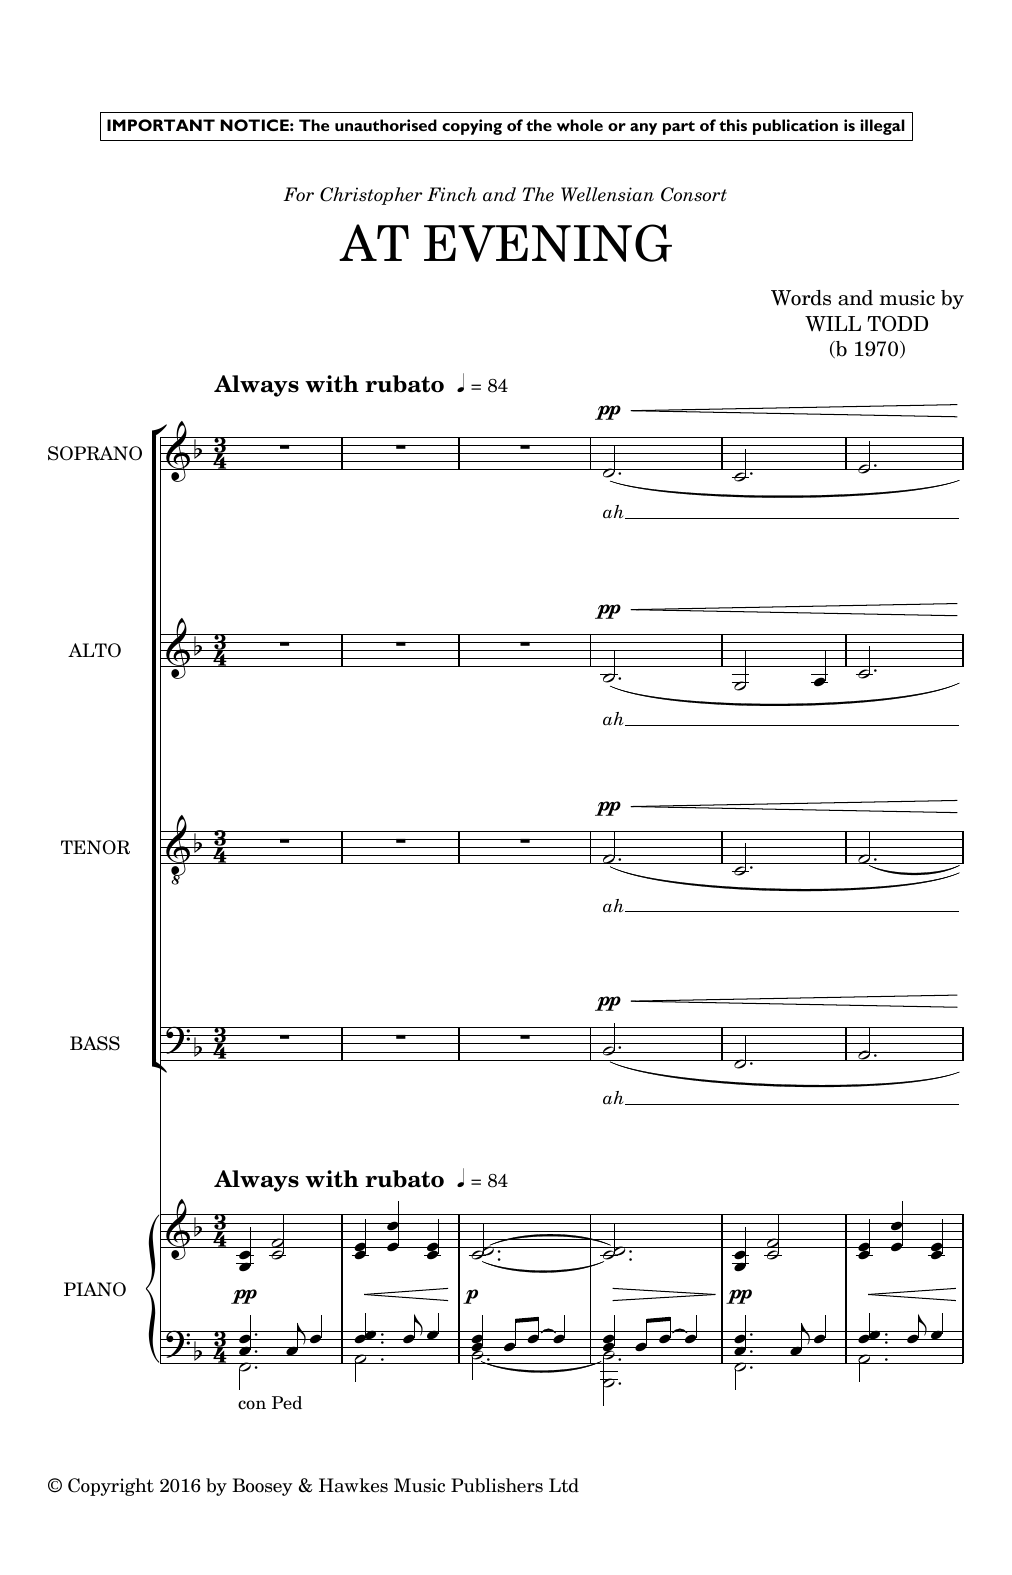 Download Will Todd At Evening Sheet Music